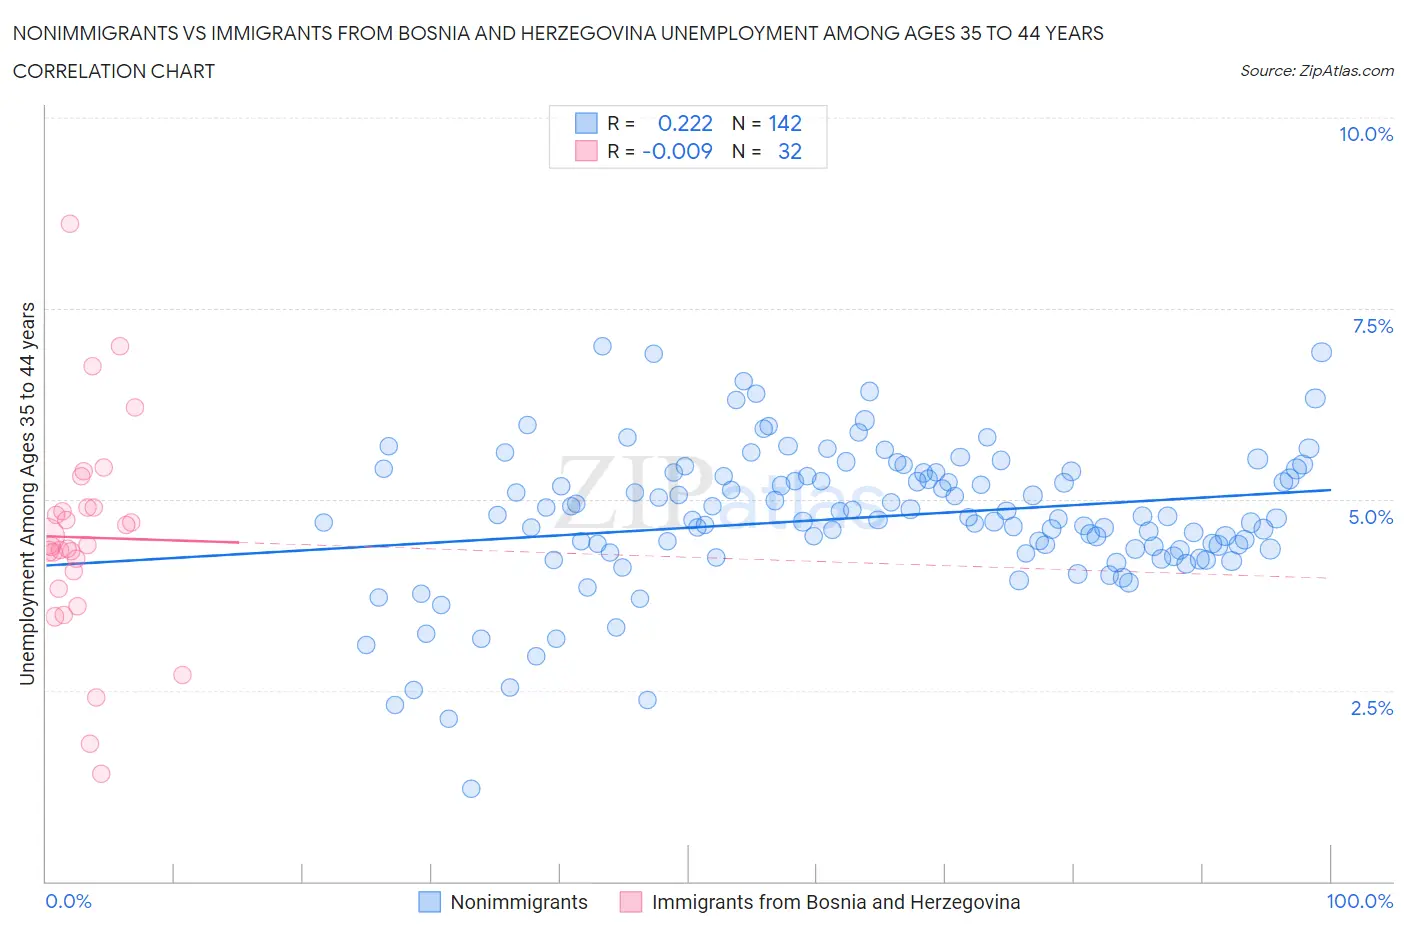 Nonimmigrants vs Immigrants from Bosnia and Herzegovina Unemployment Among Ages 35 to 44 years